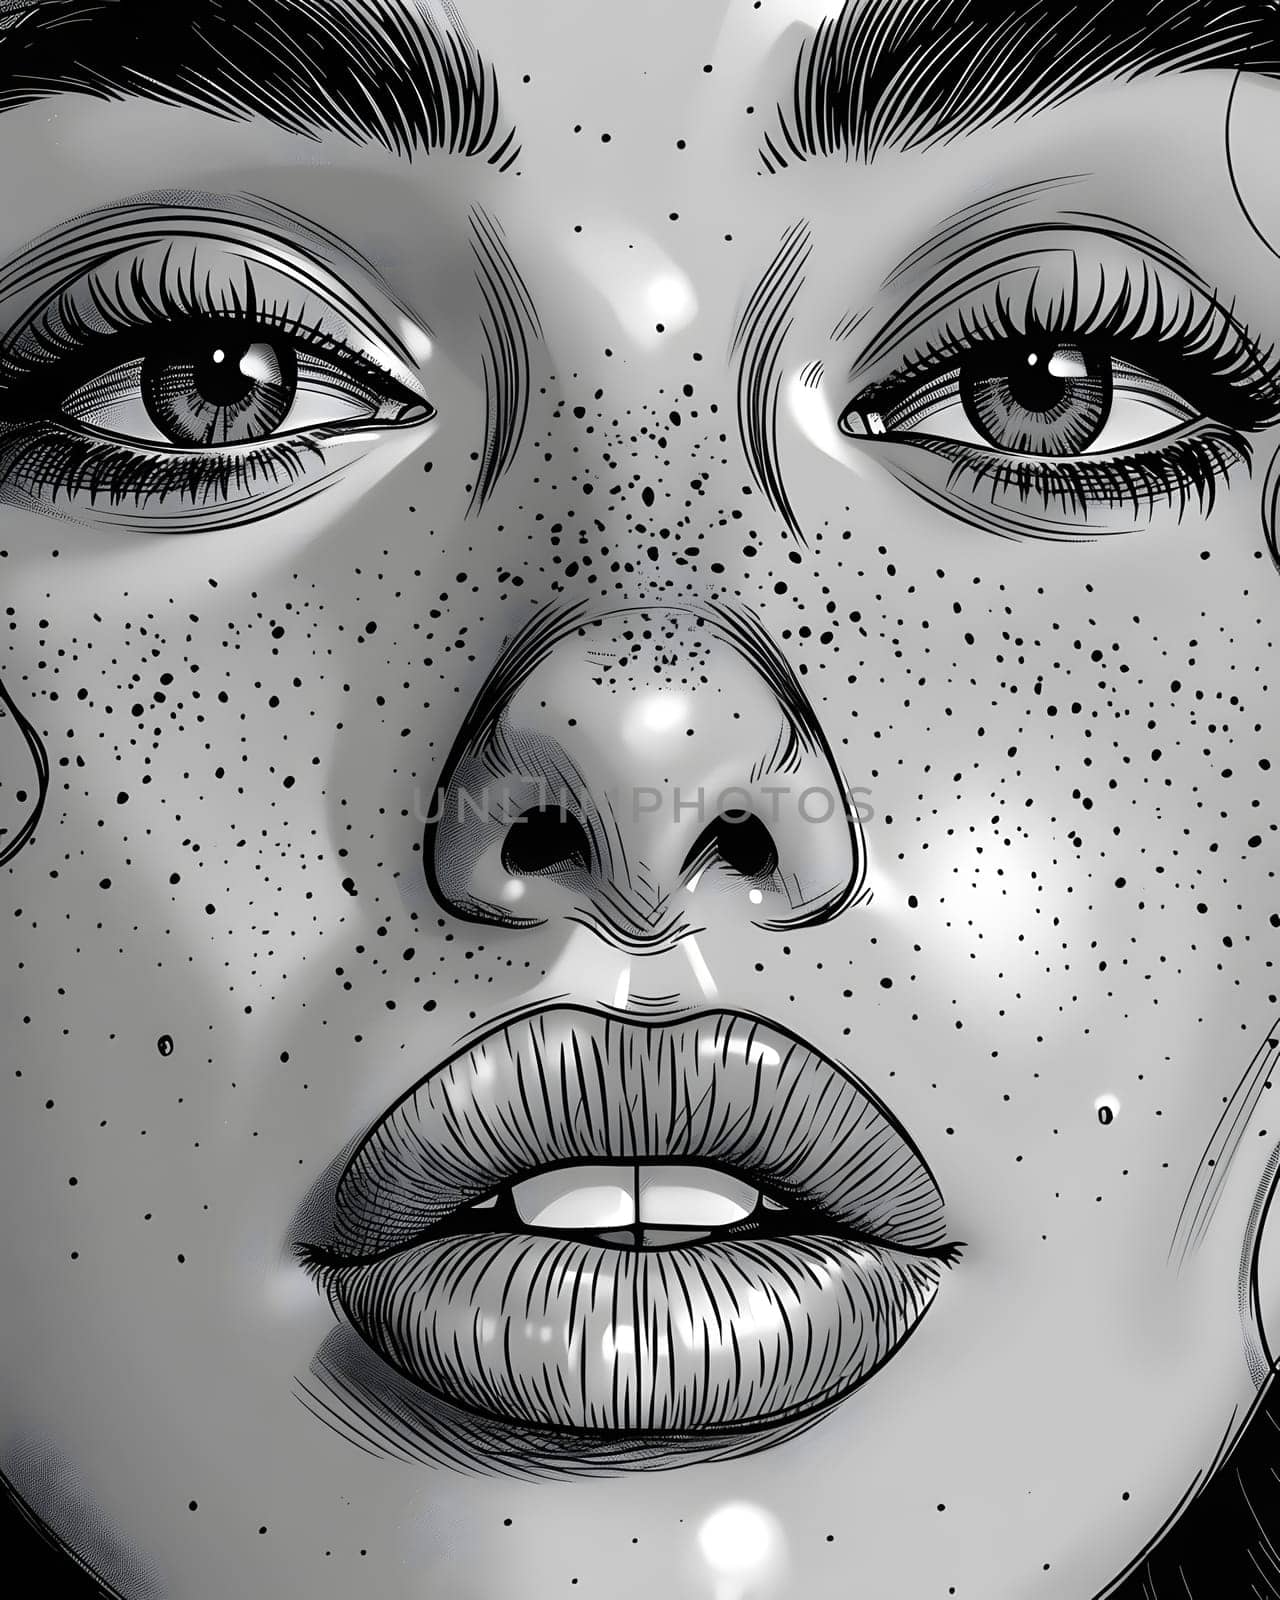 a black and white drawing of a woman s face with freckles by Nadtochiy